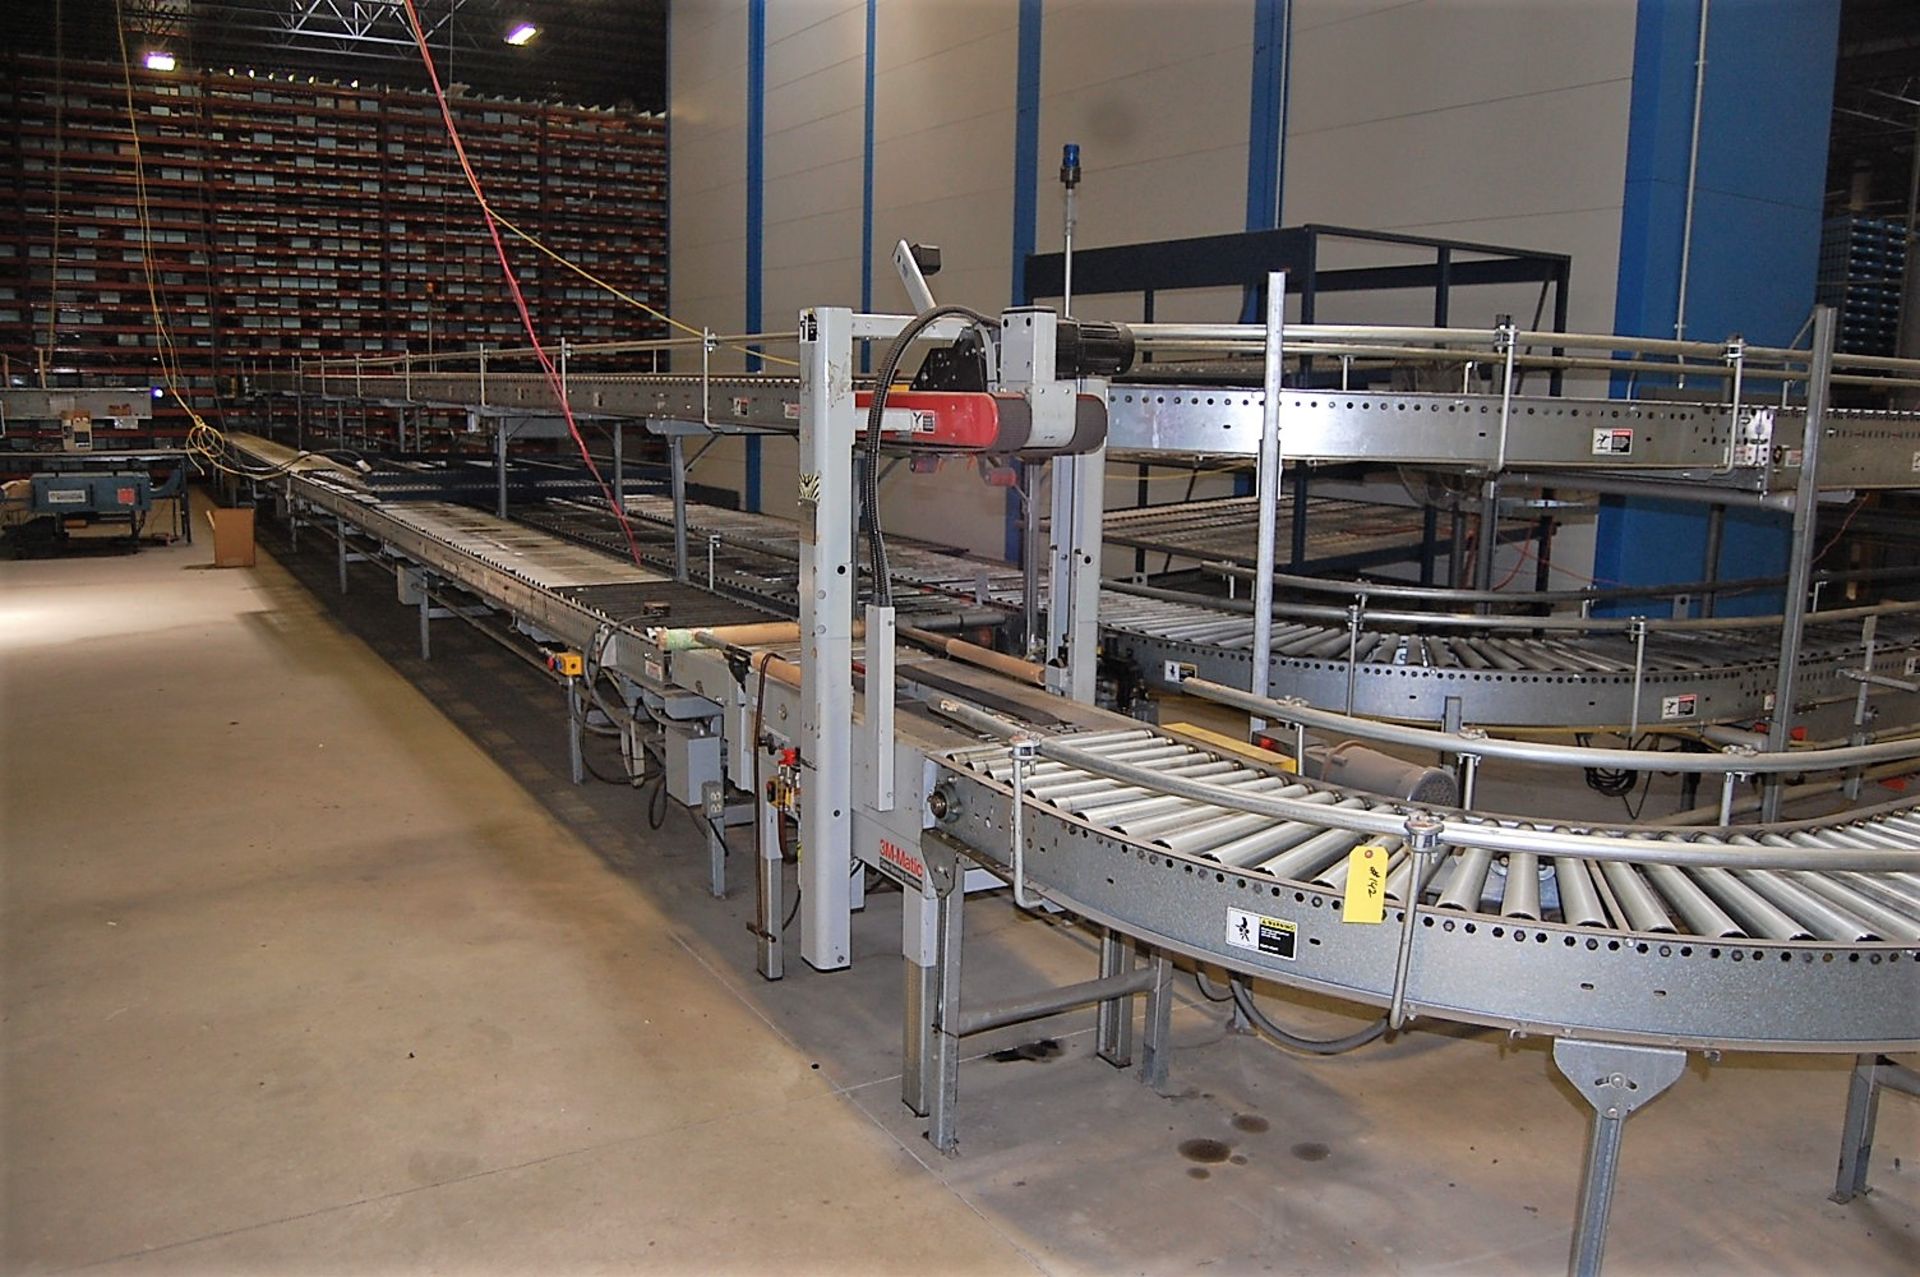 White Conveyors Model Remstar Series 2400 Vertical Carousel Storage/Inventory System - Image 36 of 49